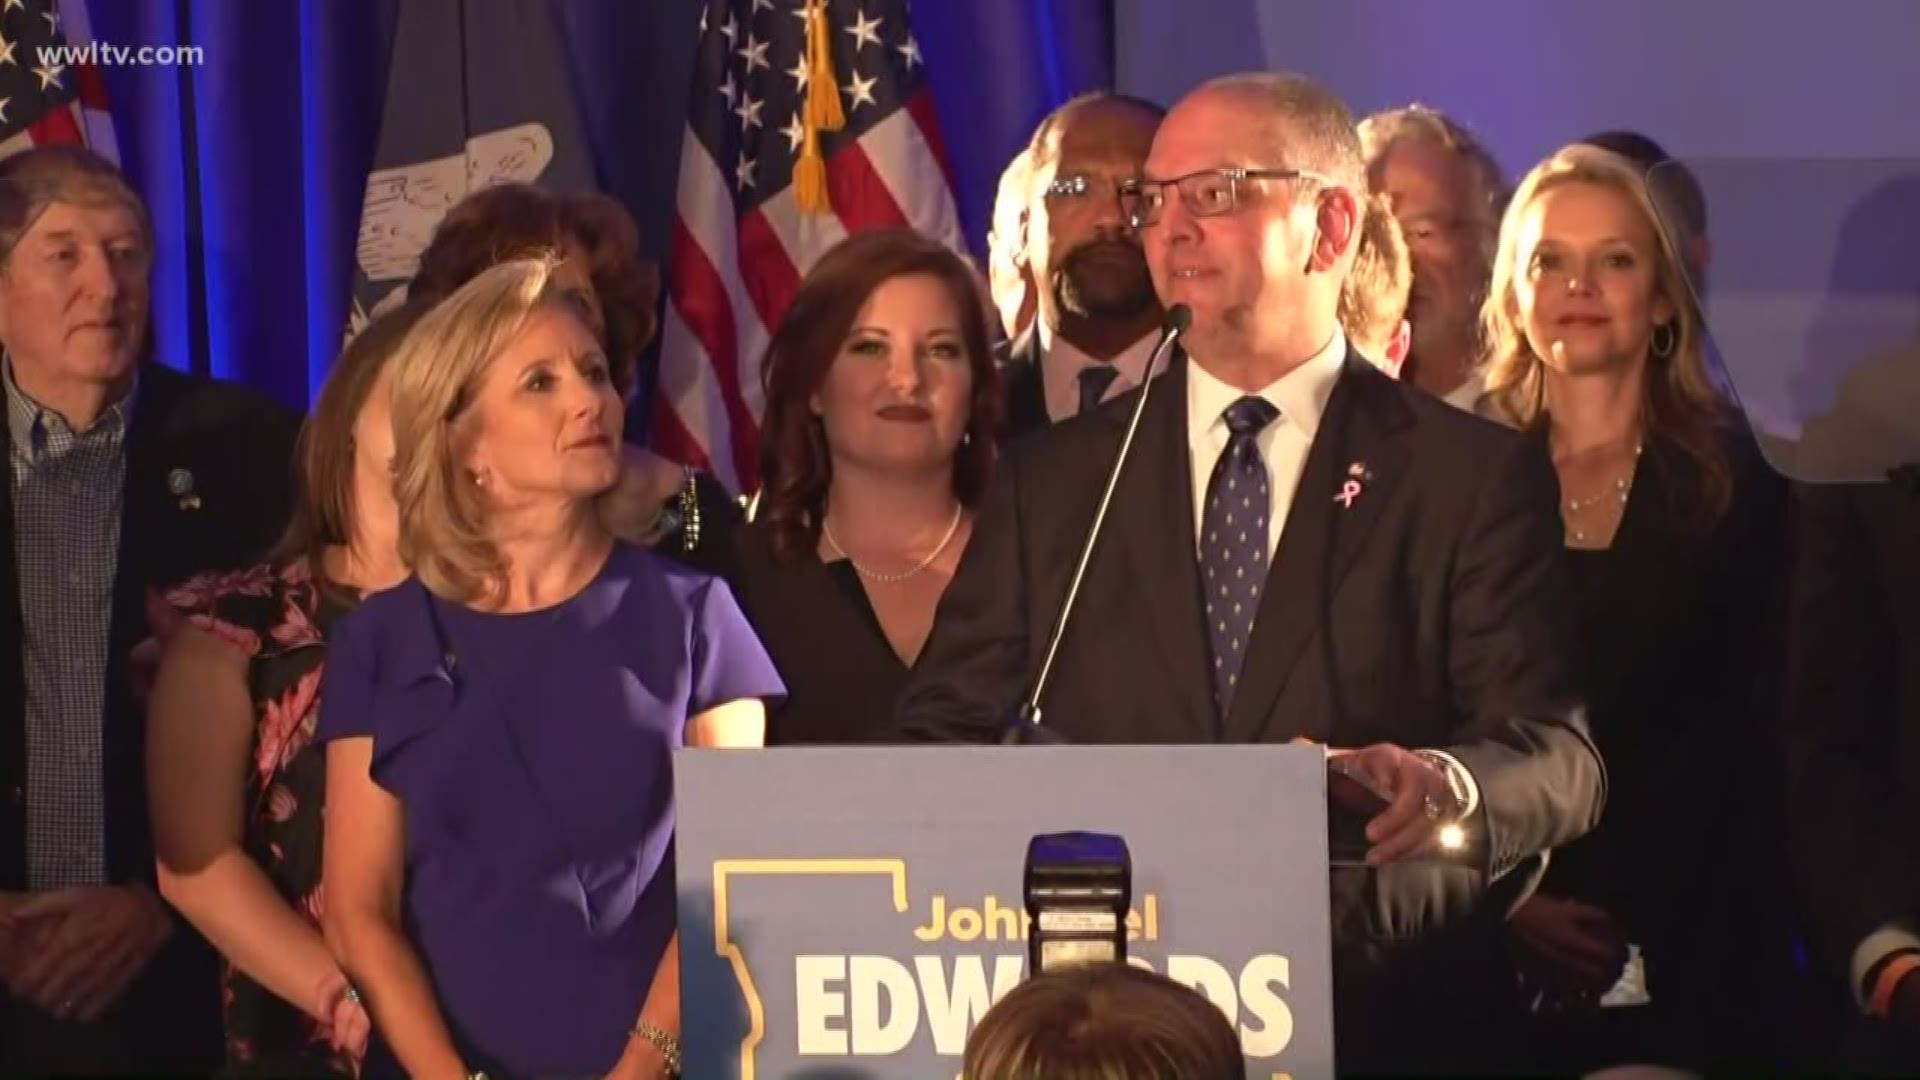 Governor John Bel Edwards was forced into a runoff election with Republican Eddie Rispone after Edwards received 47% of the vote on Oct. 12, 2019.